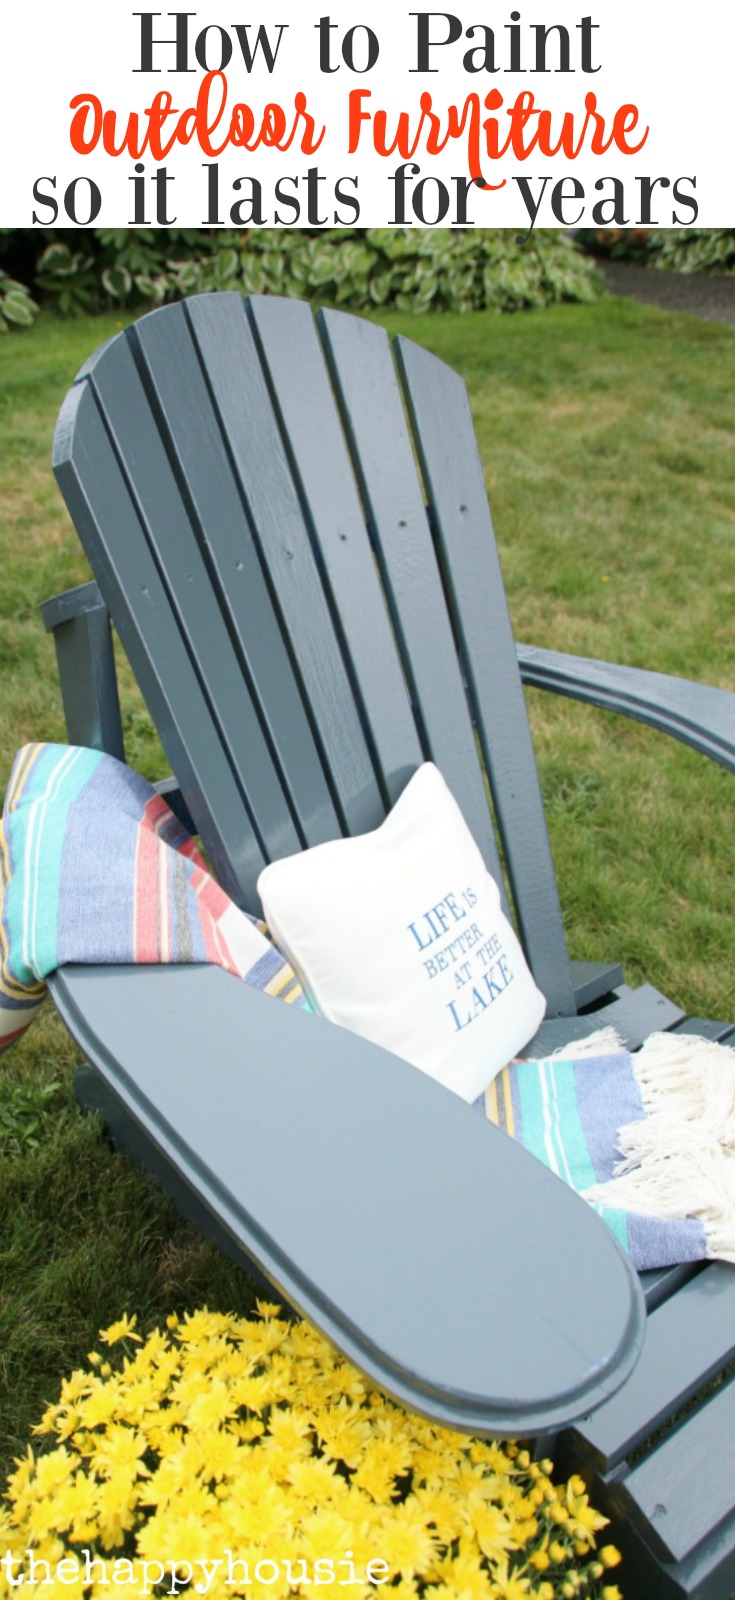 A large Adirondack chair on the grass with a pillow and blanket on it.